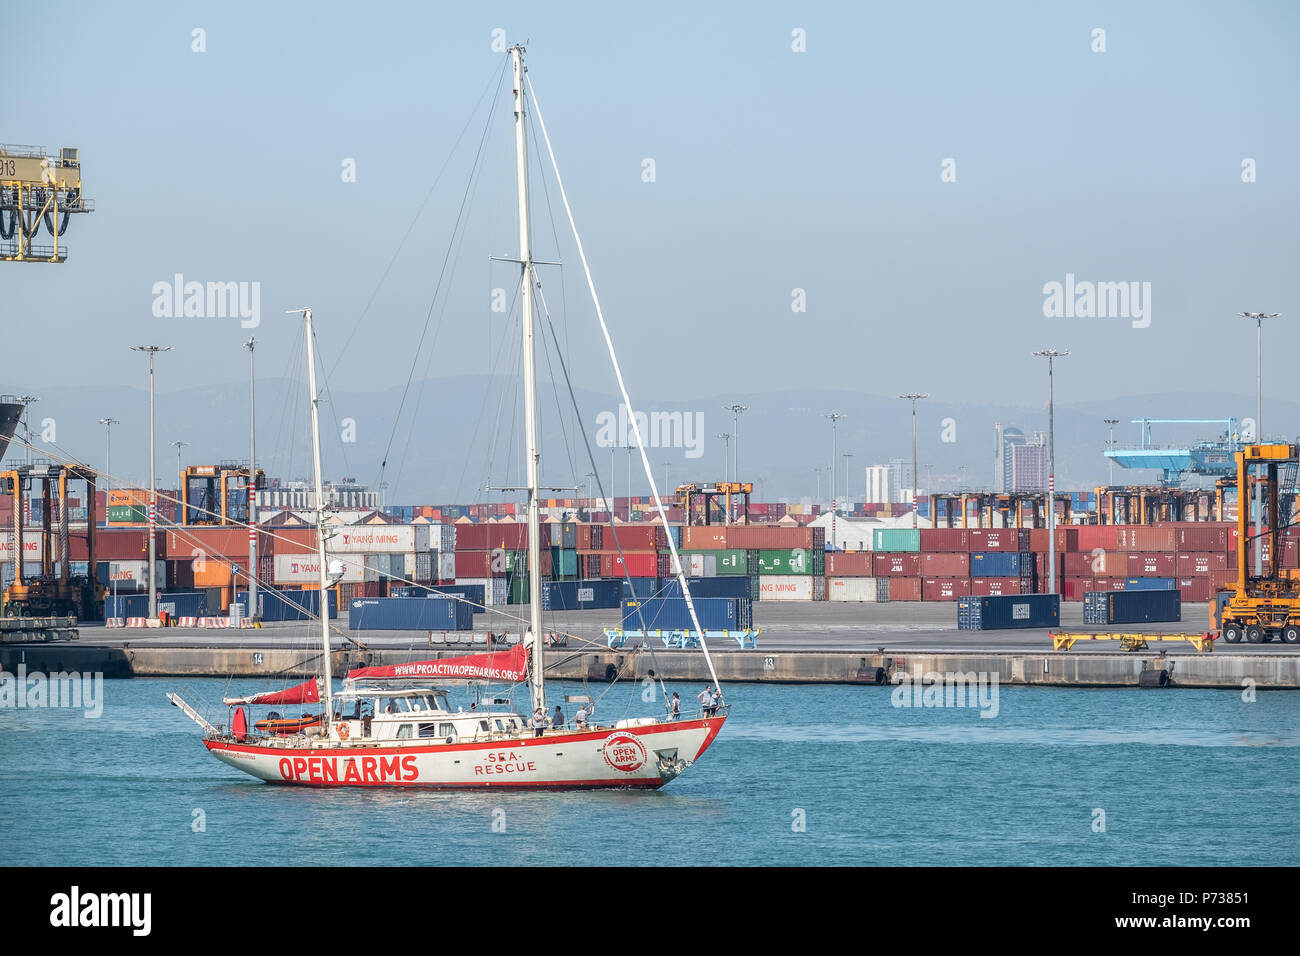 The rescue sailing boat Proactiva Open Arms has docked in Barcelona with 60 people rescued in the Mediterranean off the coast of Libya. Barcelona has offered itself as a refuge city after Italy's refusal to continue hosting more rescues carried out by NGOs. Stock Photo